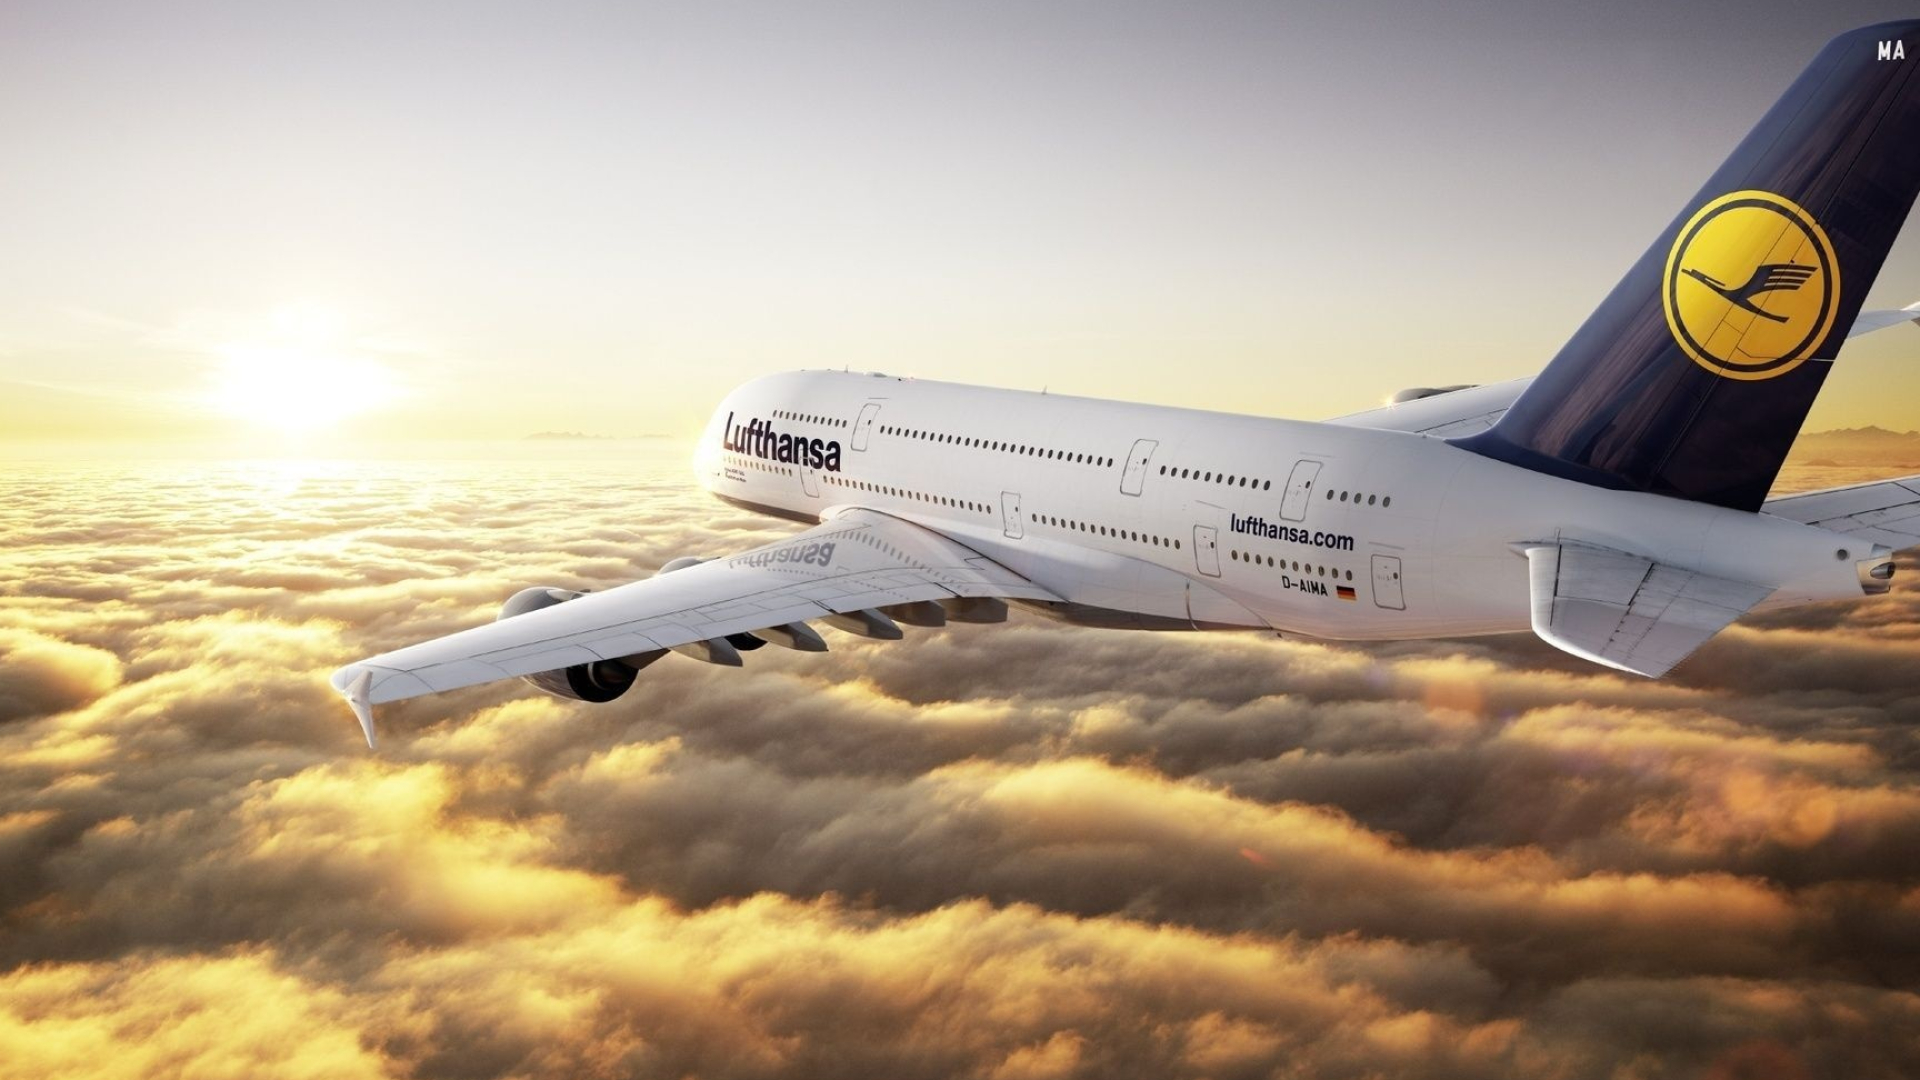 Lufthansa, Top free backgrounds, Airline wallpapers, Travel with Lufthansa, 1920x1080 Full HD Desktop